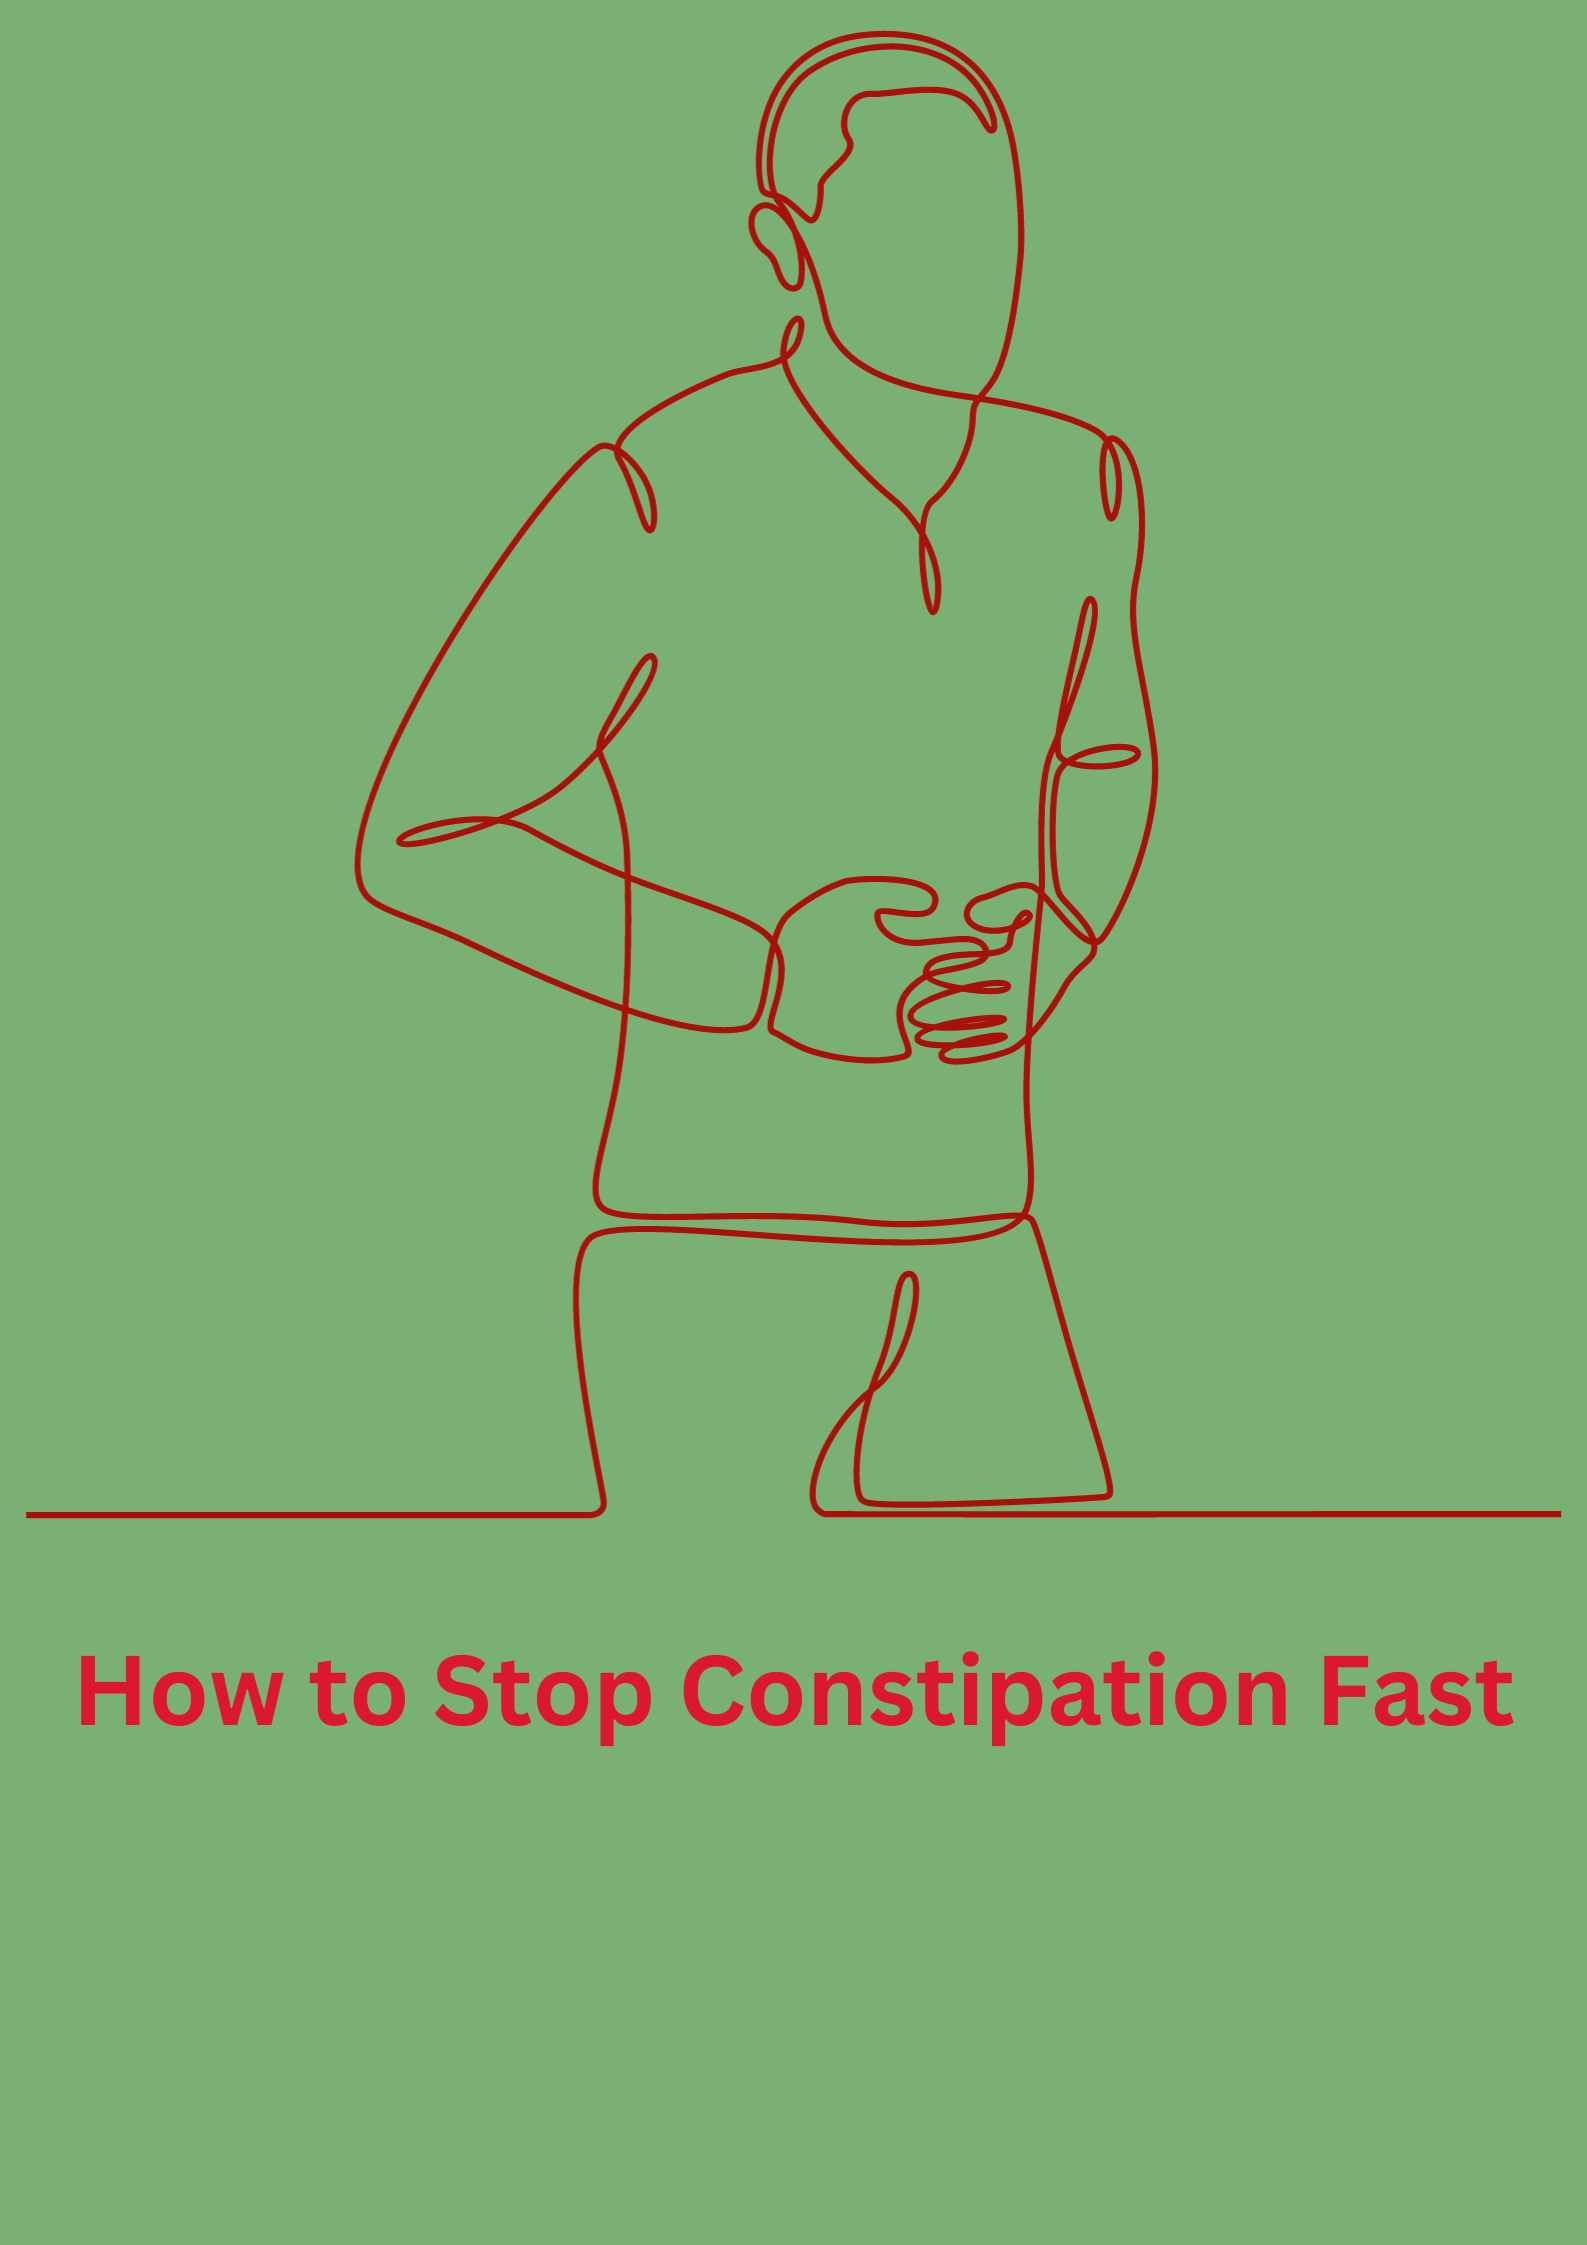 How to Stop Constipation Fast